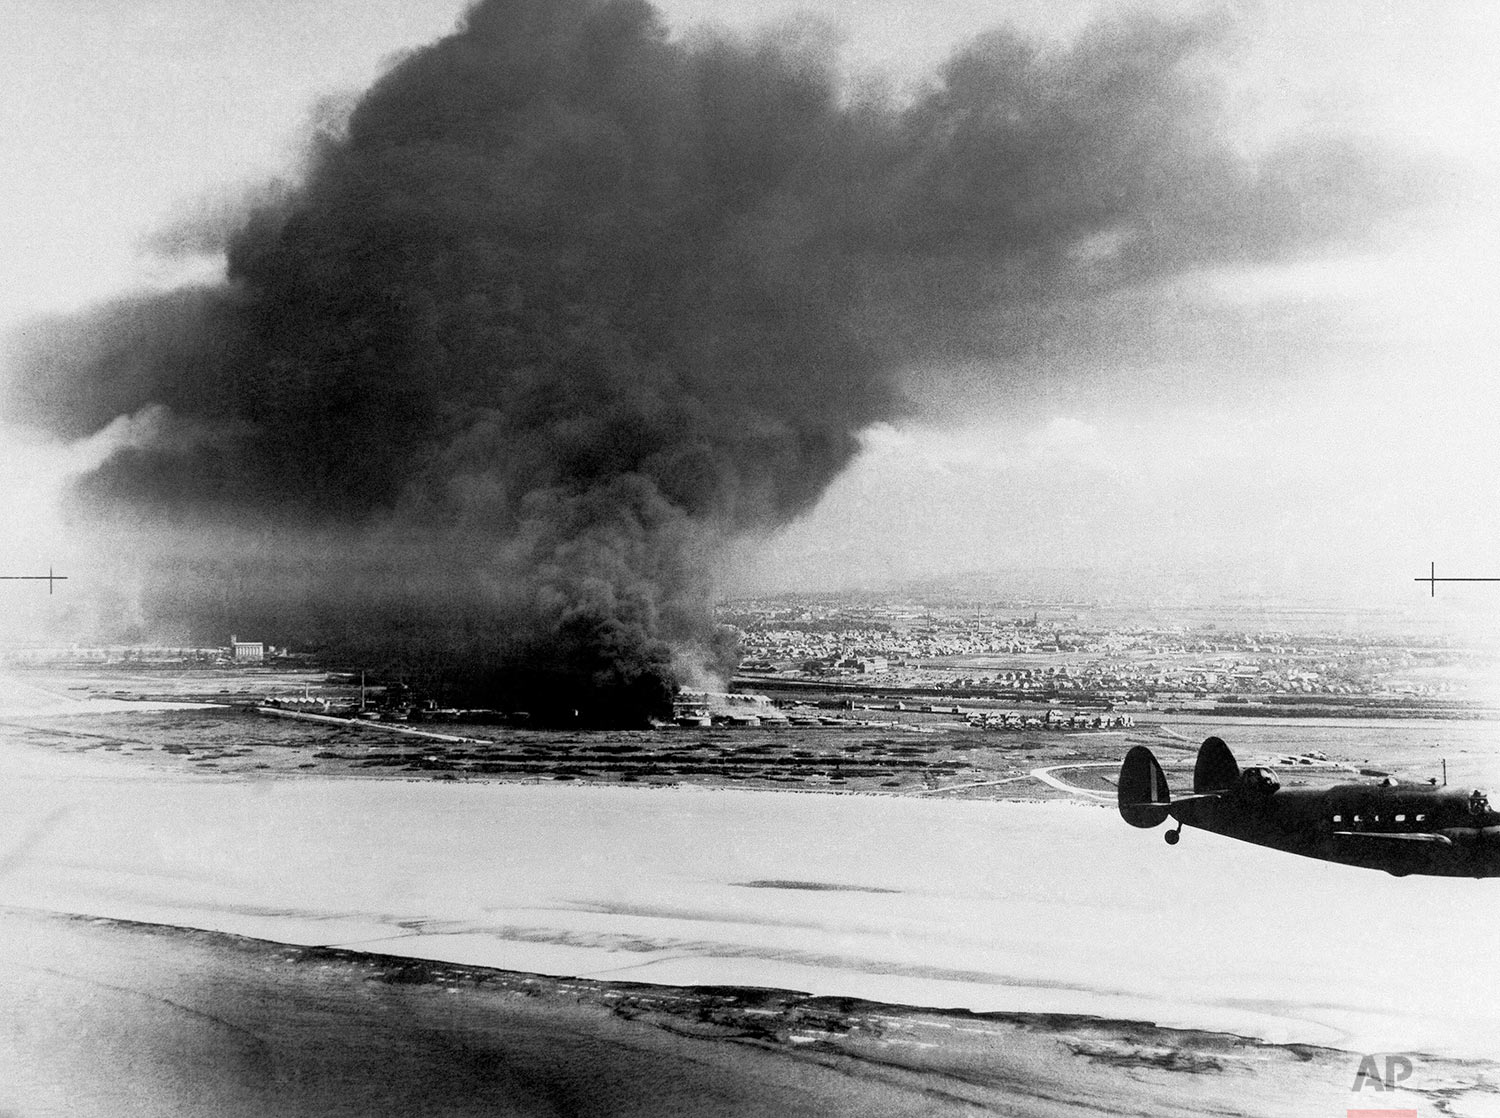  Dunkirk from the shore showing two burning oil tanks with Lockheed Hudson coastal command patrol plane in foreground on June 10, 1940 in France. (AP Photo) 